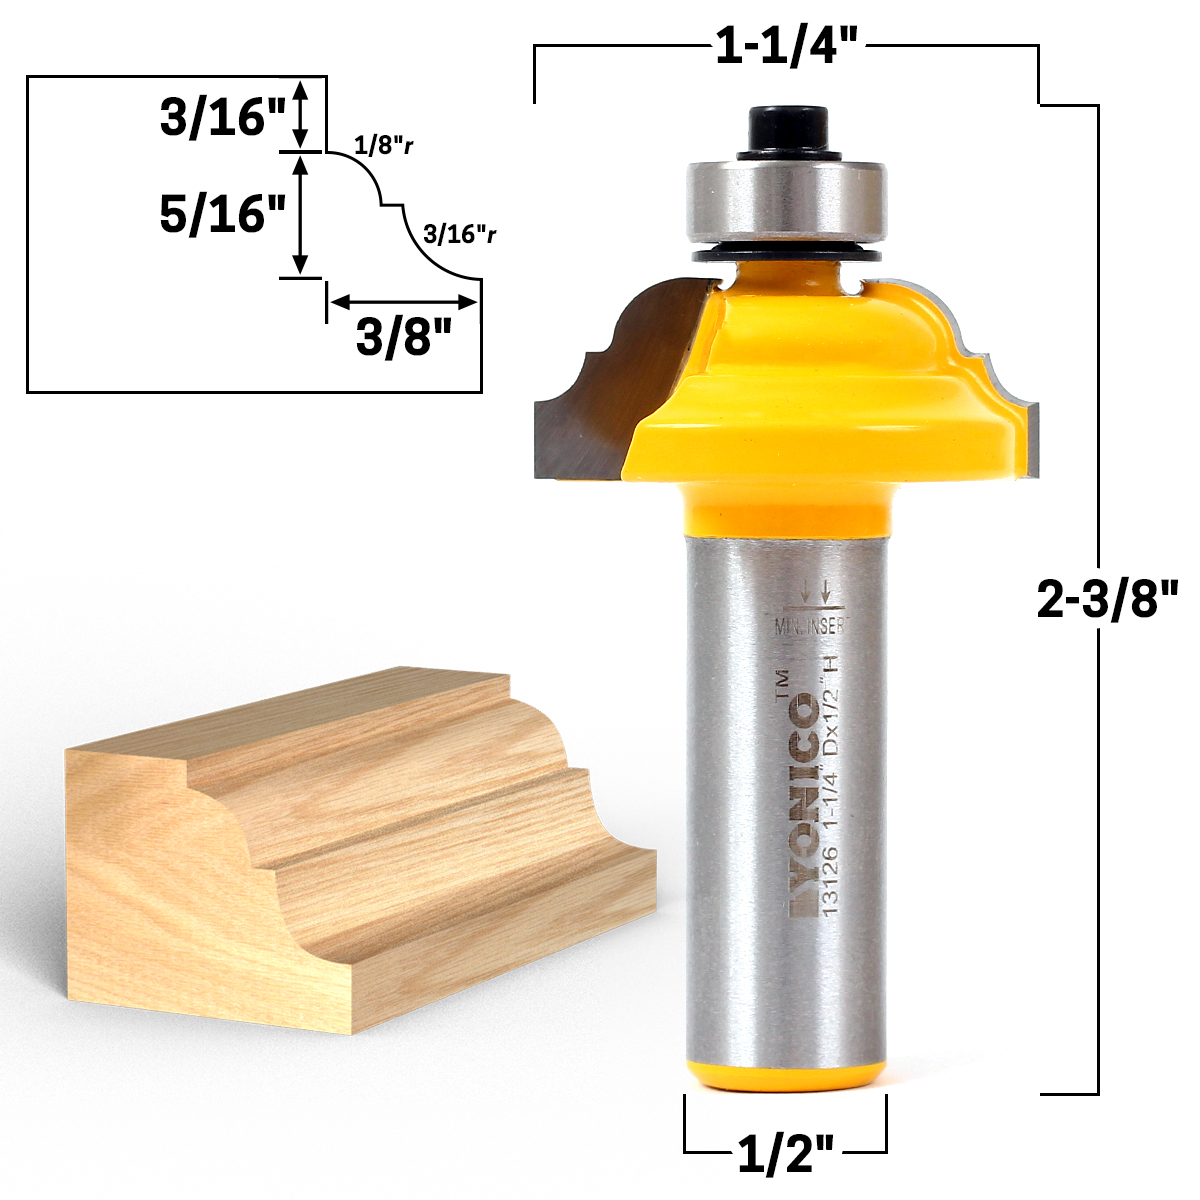 Edessö 115731808 Classic ogee router bit with ball-bearing A=31.8/R=4.8/B=14.3-C=8